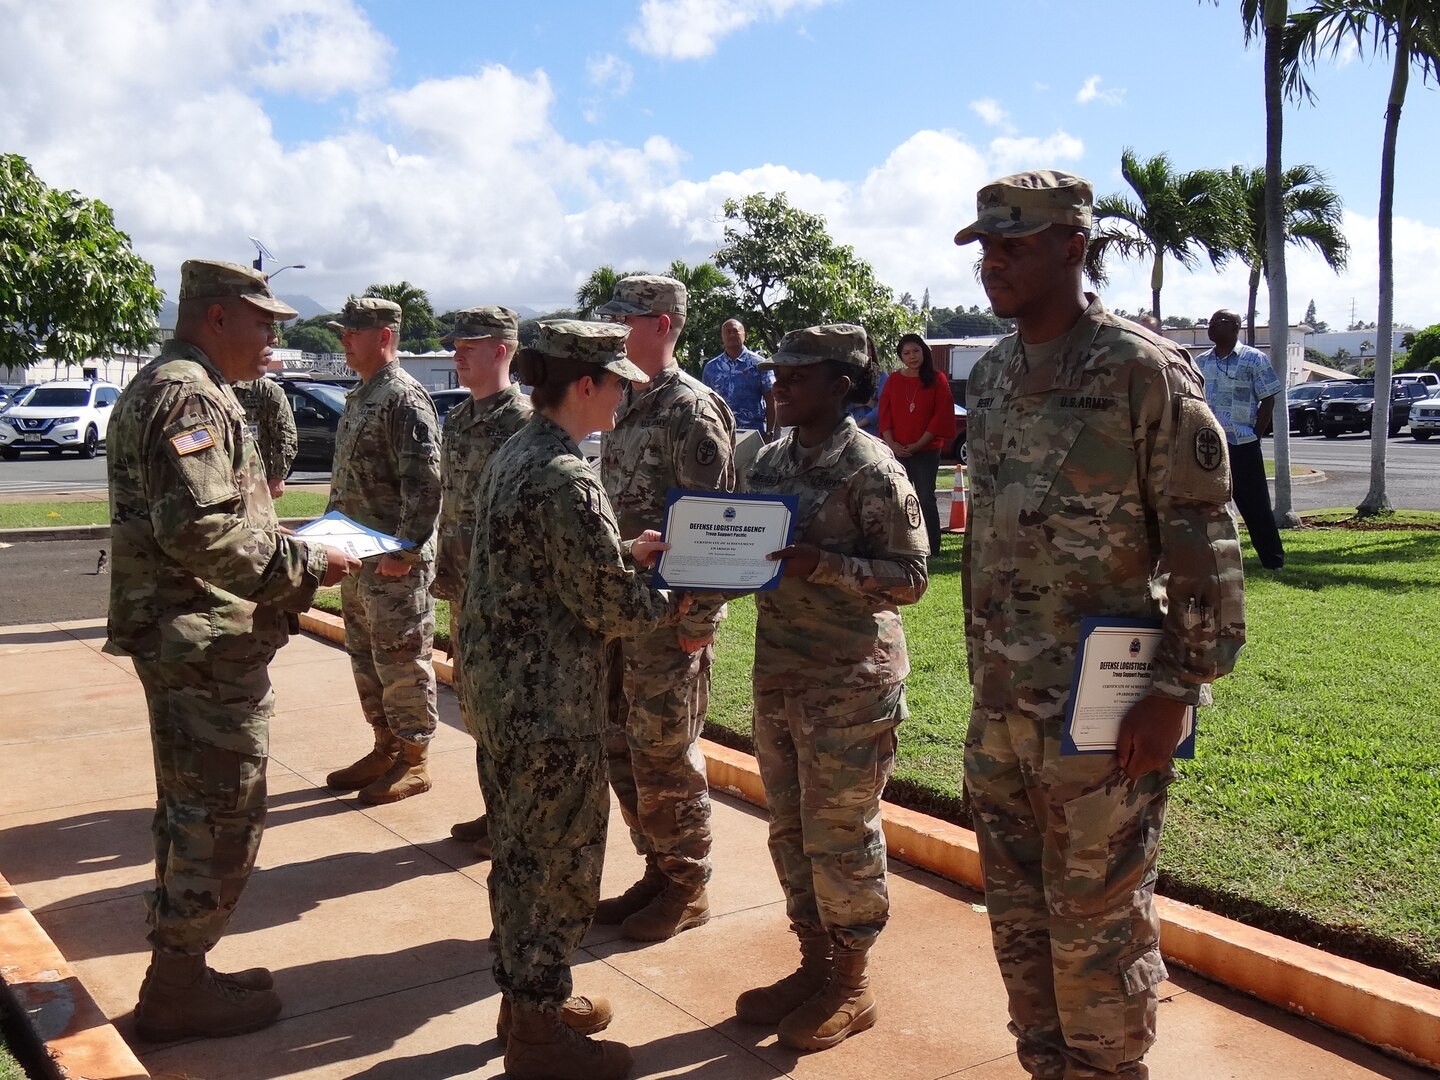 Navy Cmdr. Shani LeBlanc, DLA Troop Support Pacific commander, present a Certificate of Achievement awards to Army Spc. Jazzmon Brunson, a food safety inspector, for her contributions during RIMPACT 2018, Nov. 21, 2018 at Joint Base Pearl Harbor-Hickman, Hawaii. RIMPACT is the world's largest international maritime exercise that takes place in the Hawaiian Islands every two years.